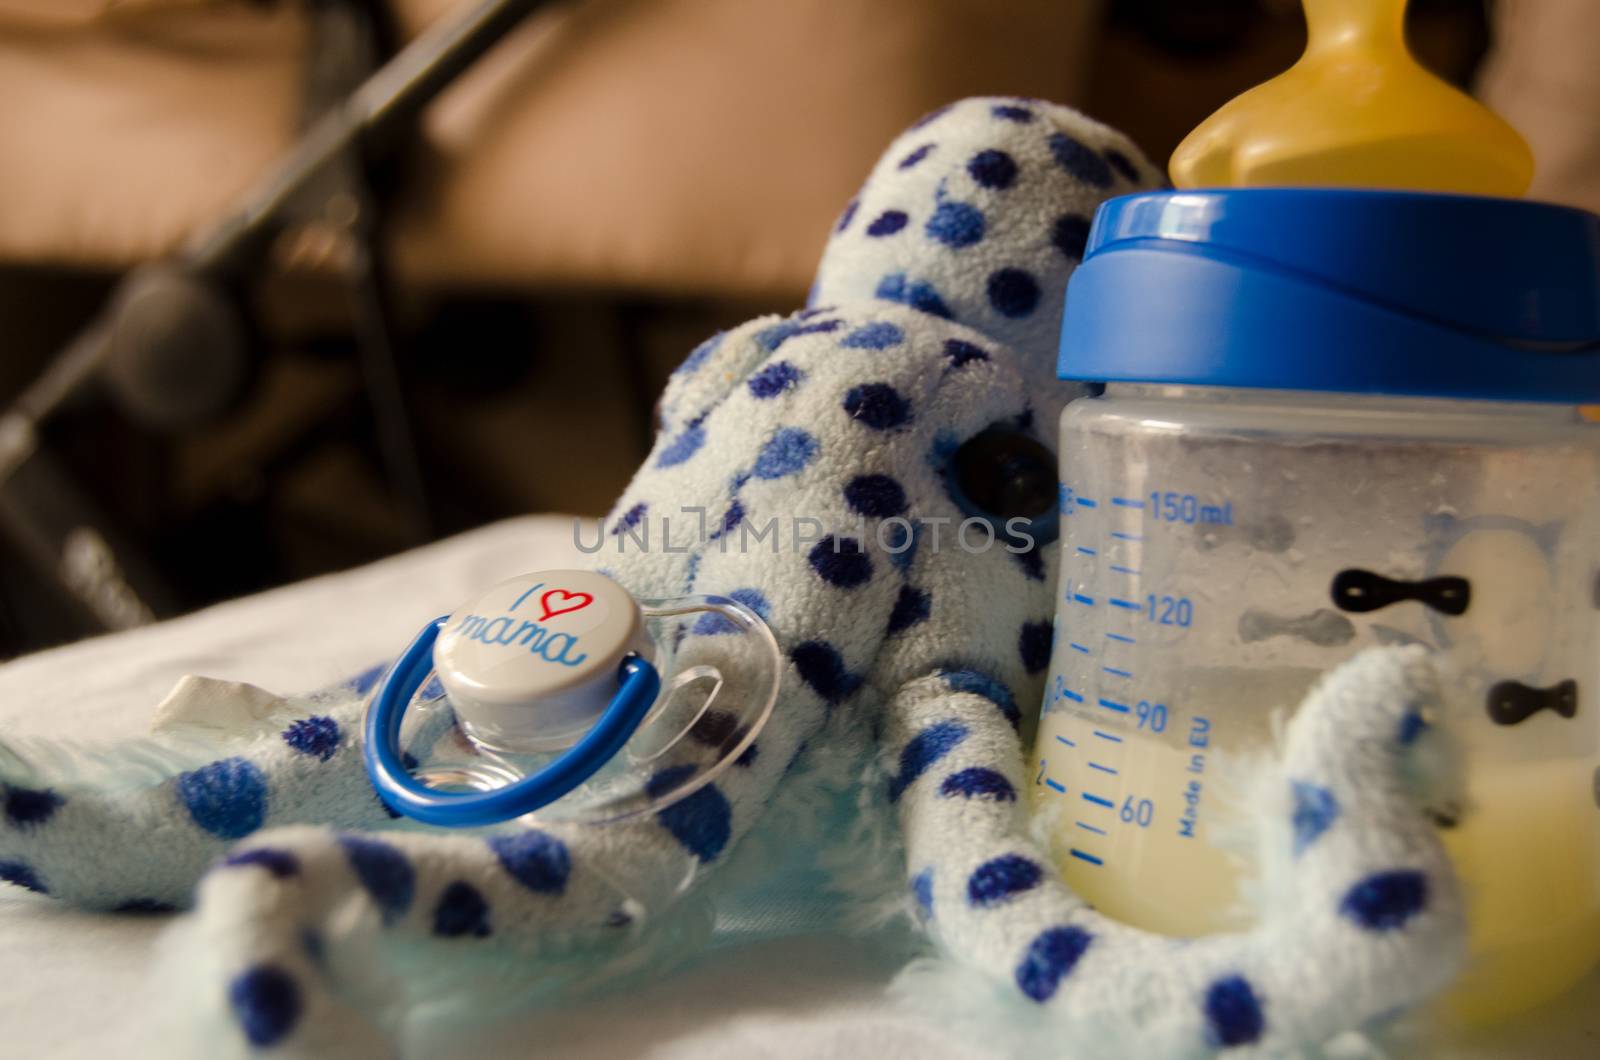 expresed milk 5 days after mother delivered baby, colostrum changing to a milk by negmardesign